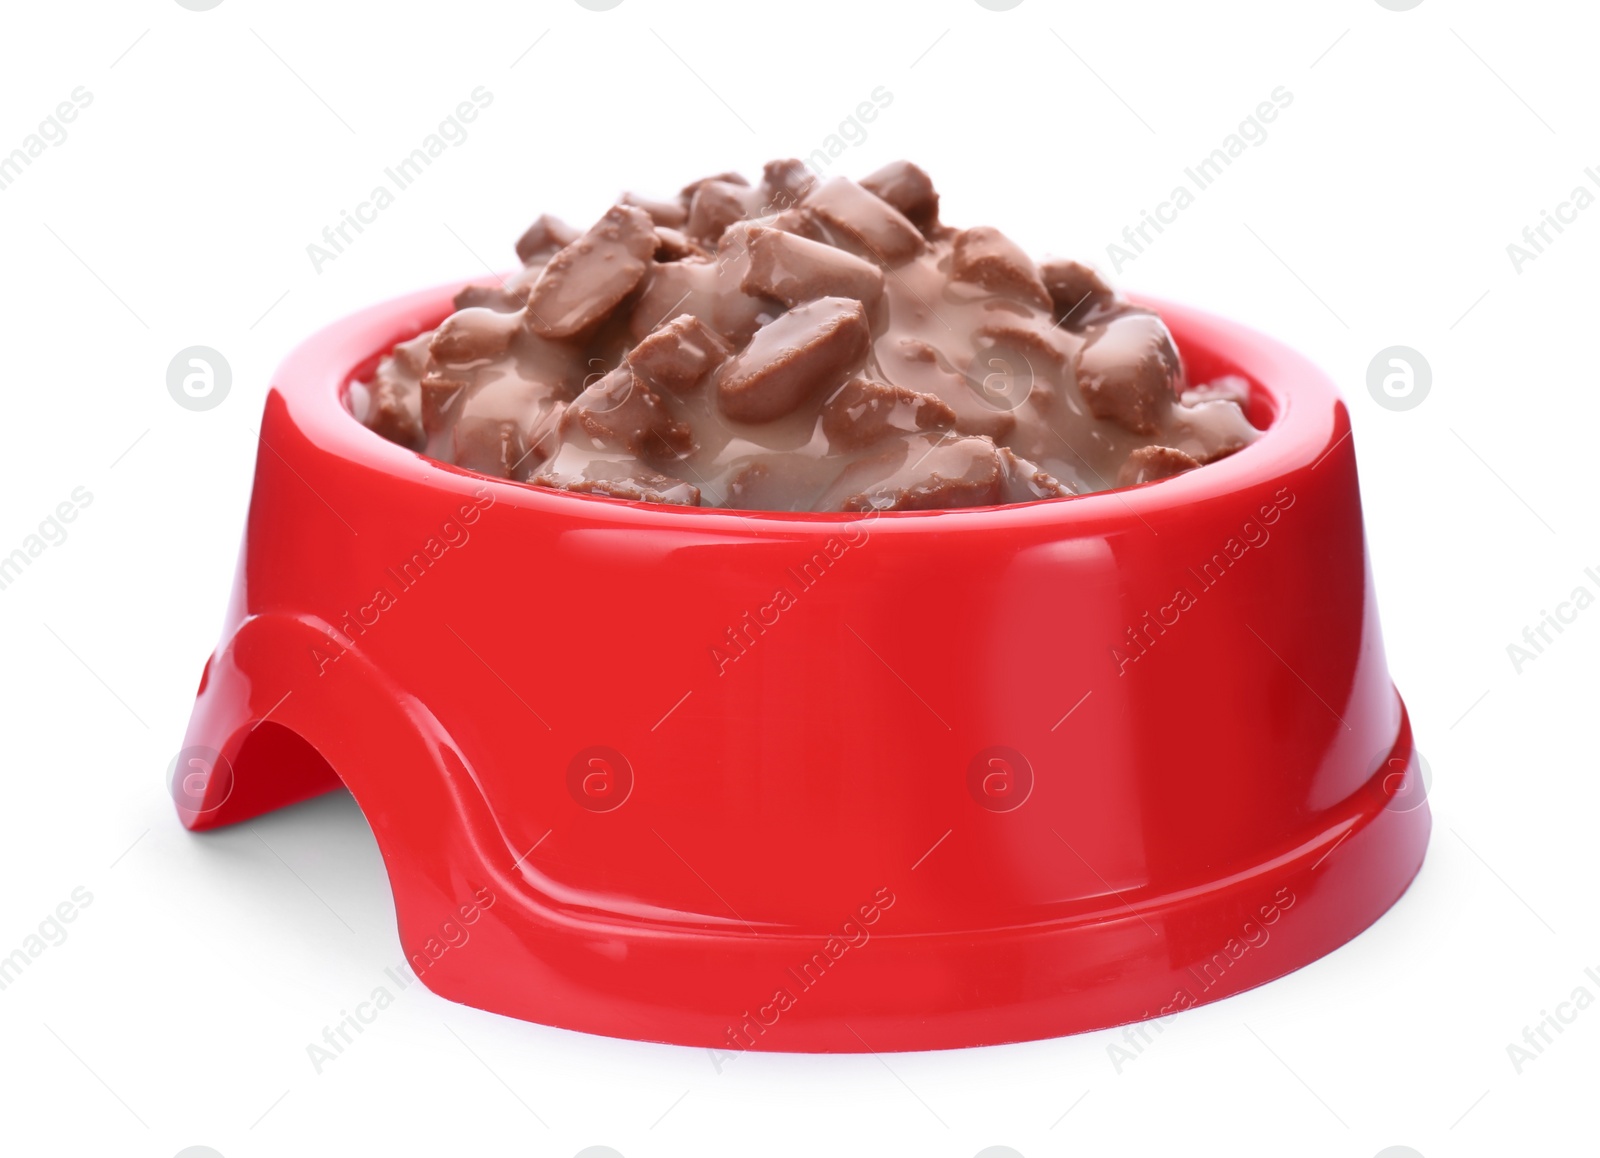 Photo of Wet pet food in red feeding bowl isolated on white